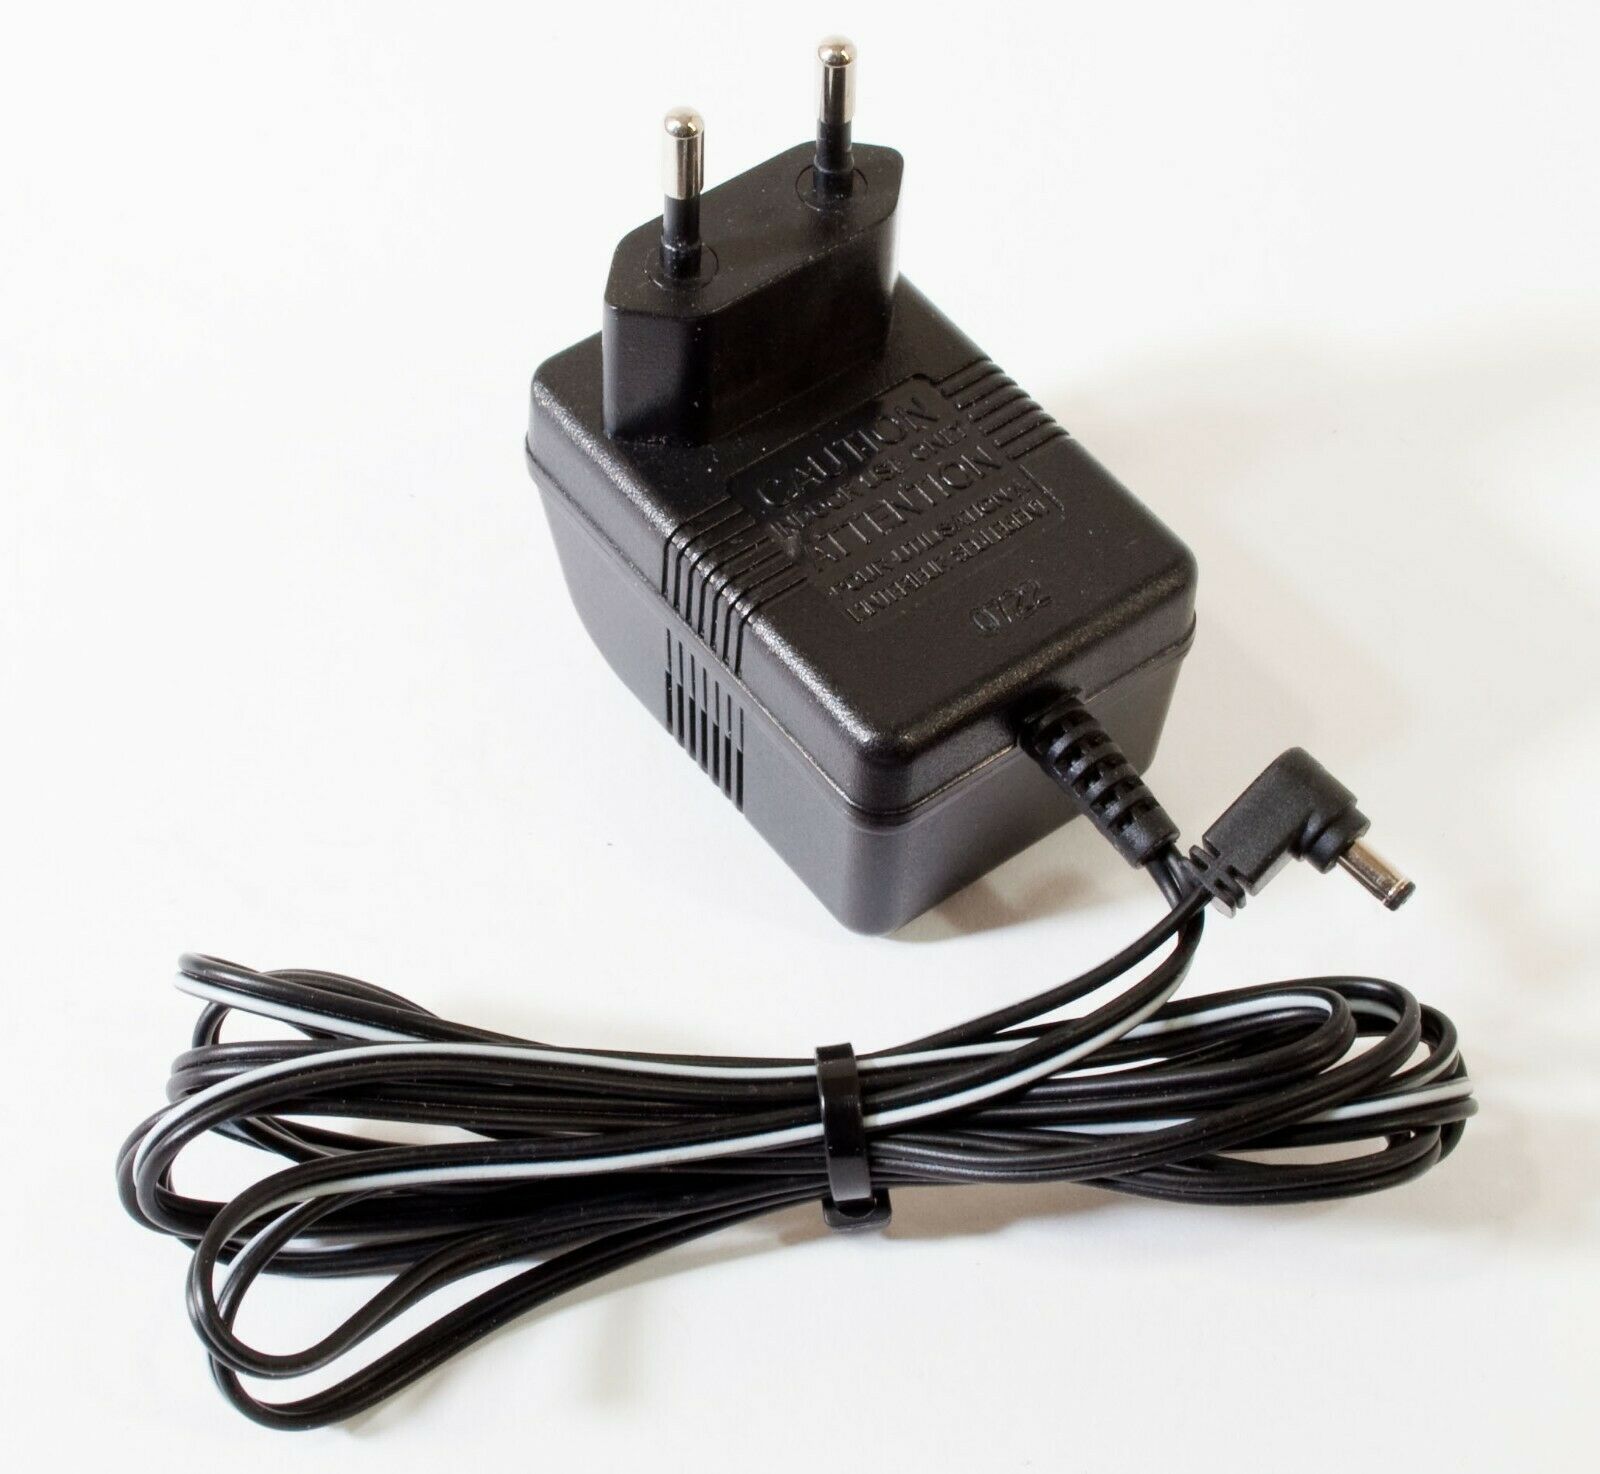 GPE SY-06030-GS AC Adapter 6V 300mA Original Charger Power Supply Output Current: 300 mA Voltage: 6 V MPN: SY-06030- - Click Image to Close